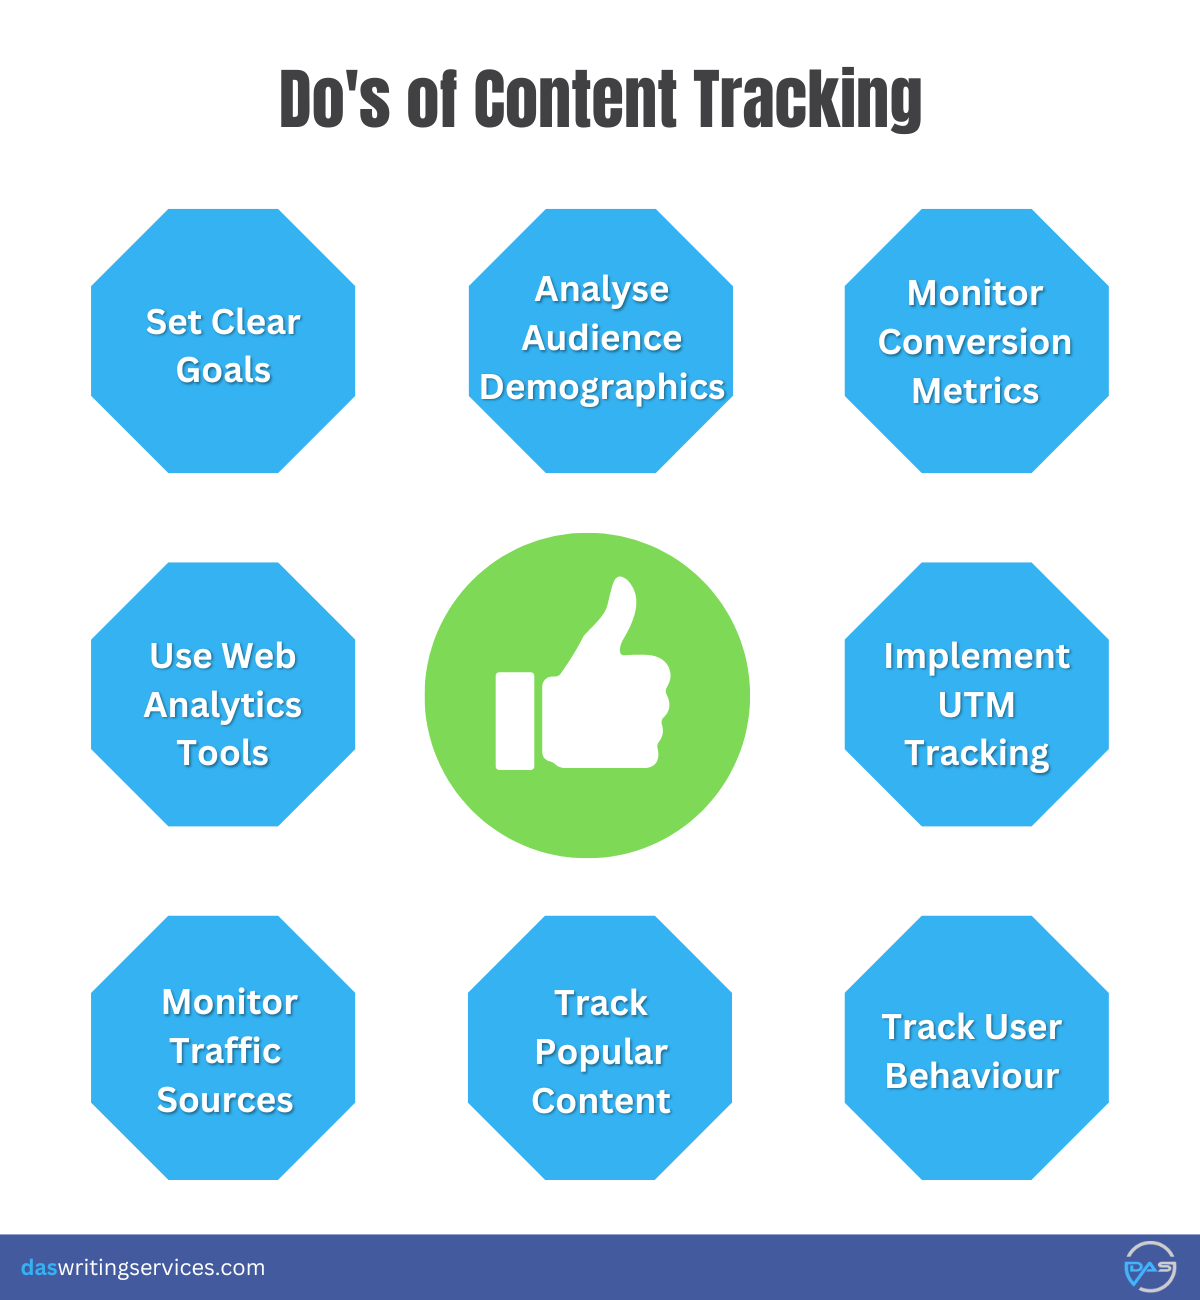 Dos of Content Tracking